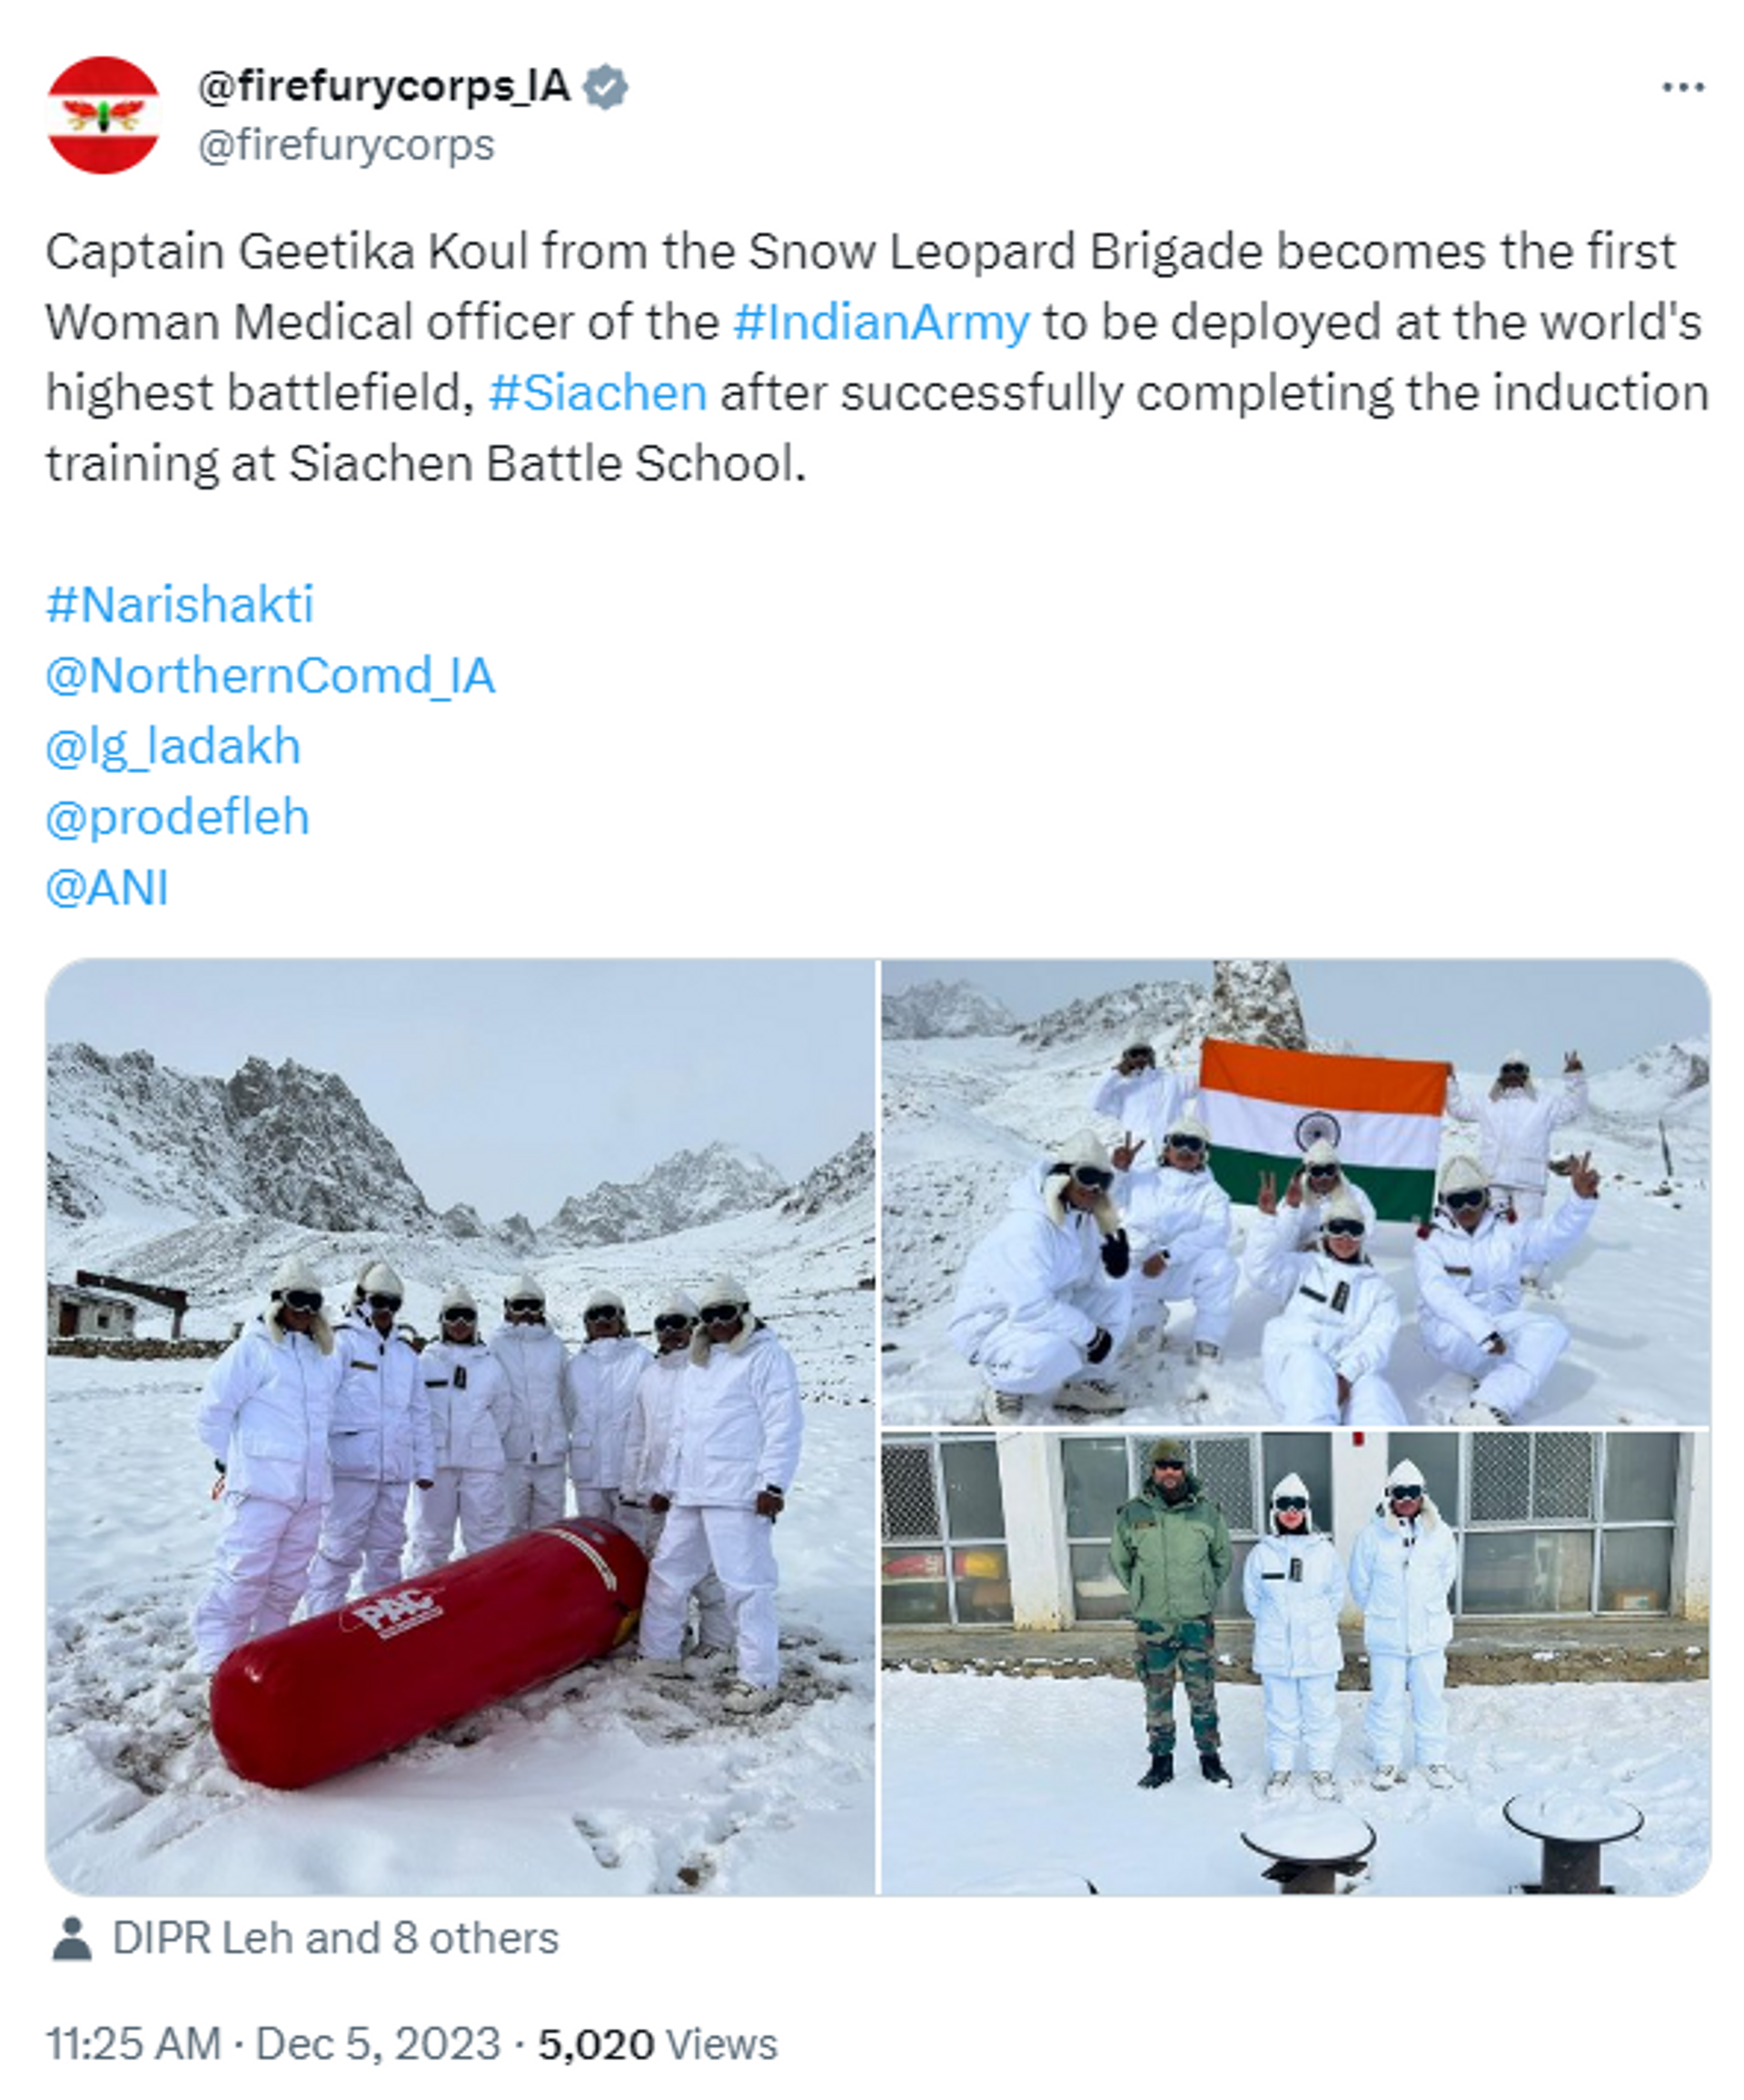 India's First Female Medical Officer Deployed at Highest Battlefield Siachen - Sputnik India, 1920, 05.12.2023